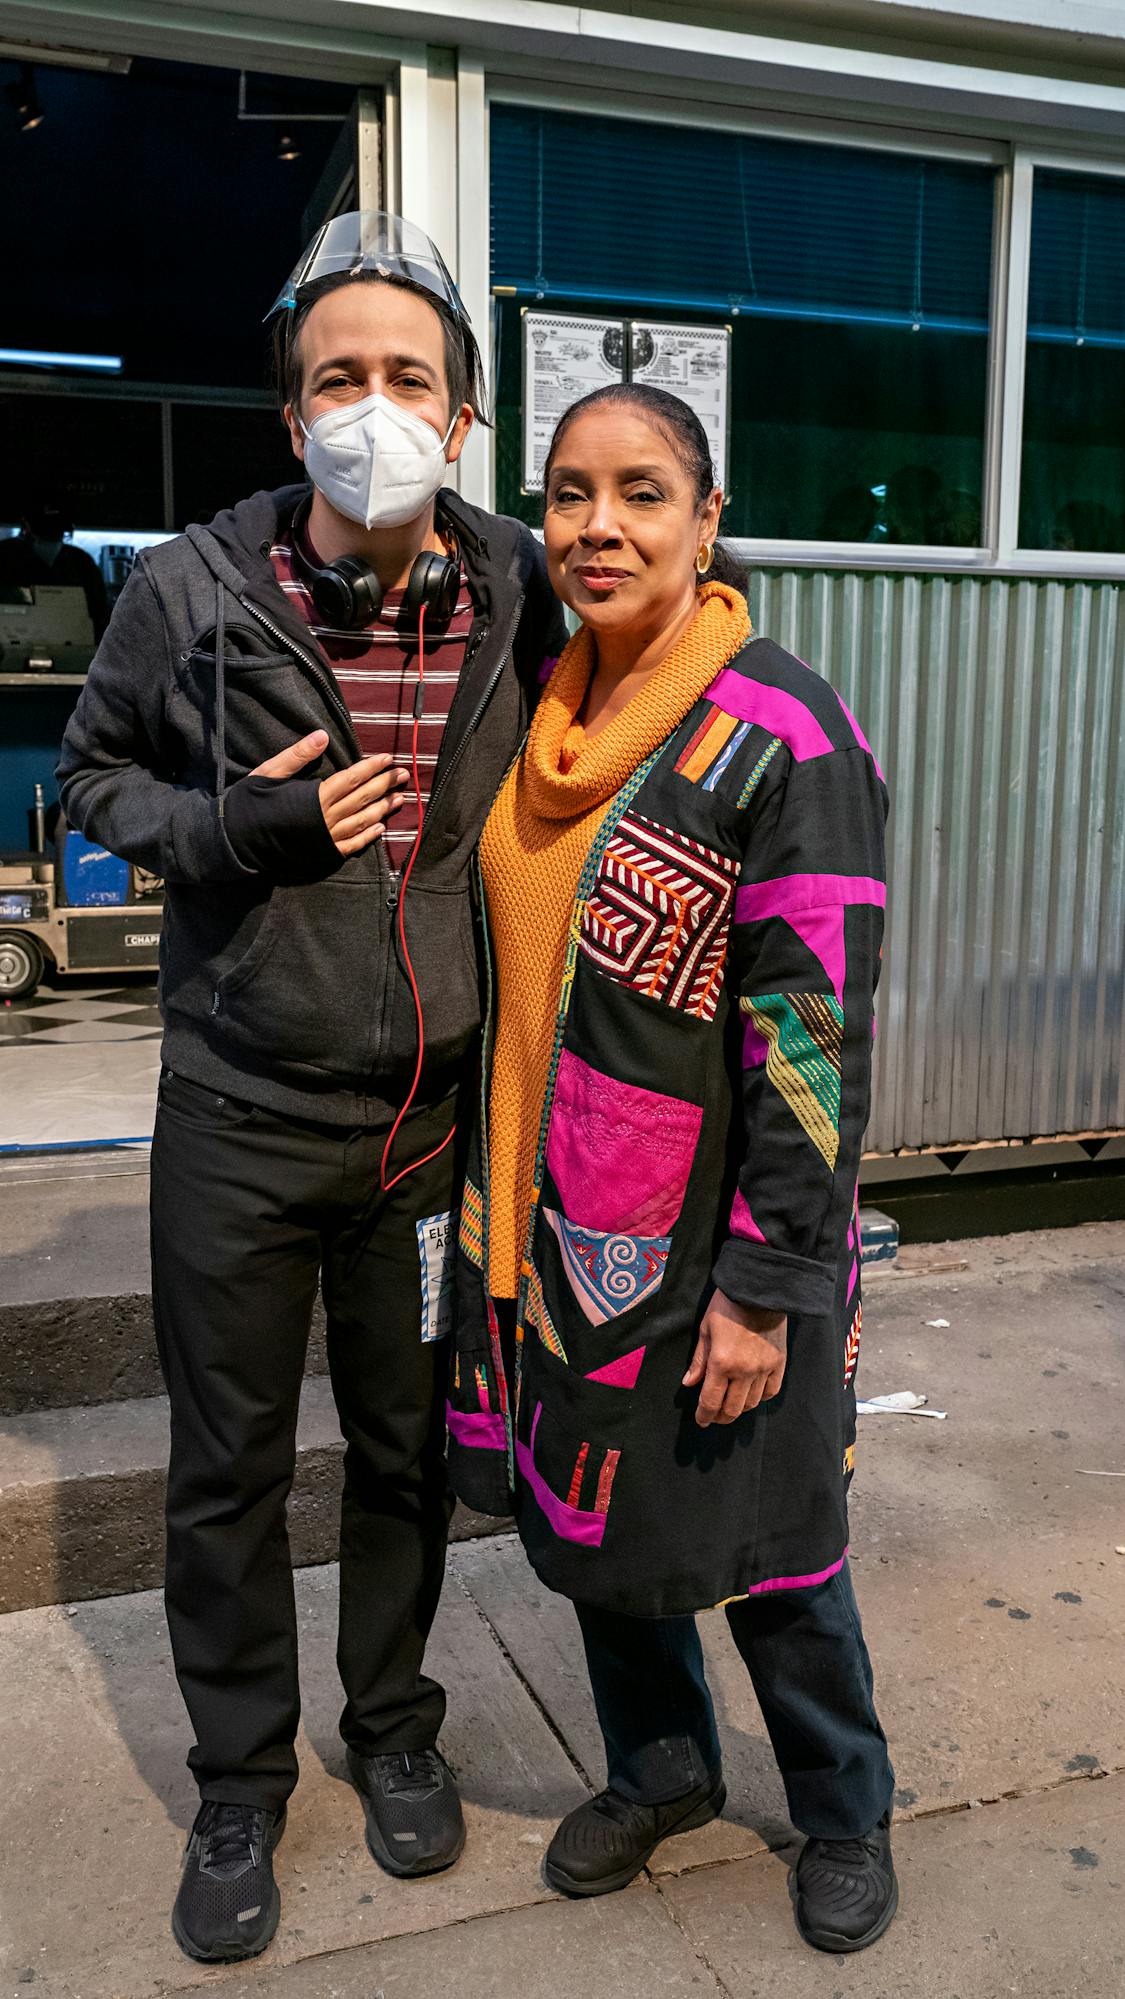 Lin-Manuel Miranda and Phylicia Rashad stand outside the Moondance Diner. Miranda wears dark clothing and protective gear. Rashad wears a colorful sweater and orange turtleneck.